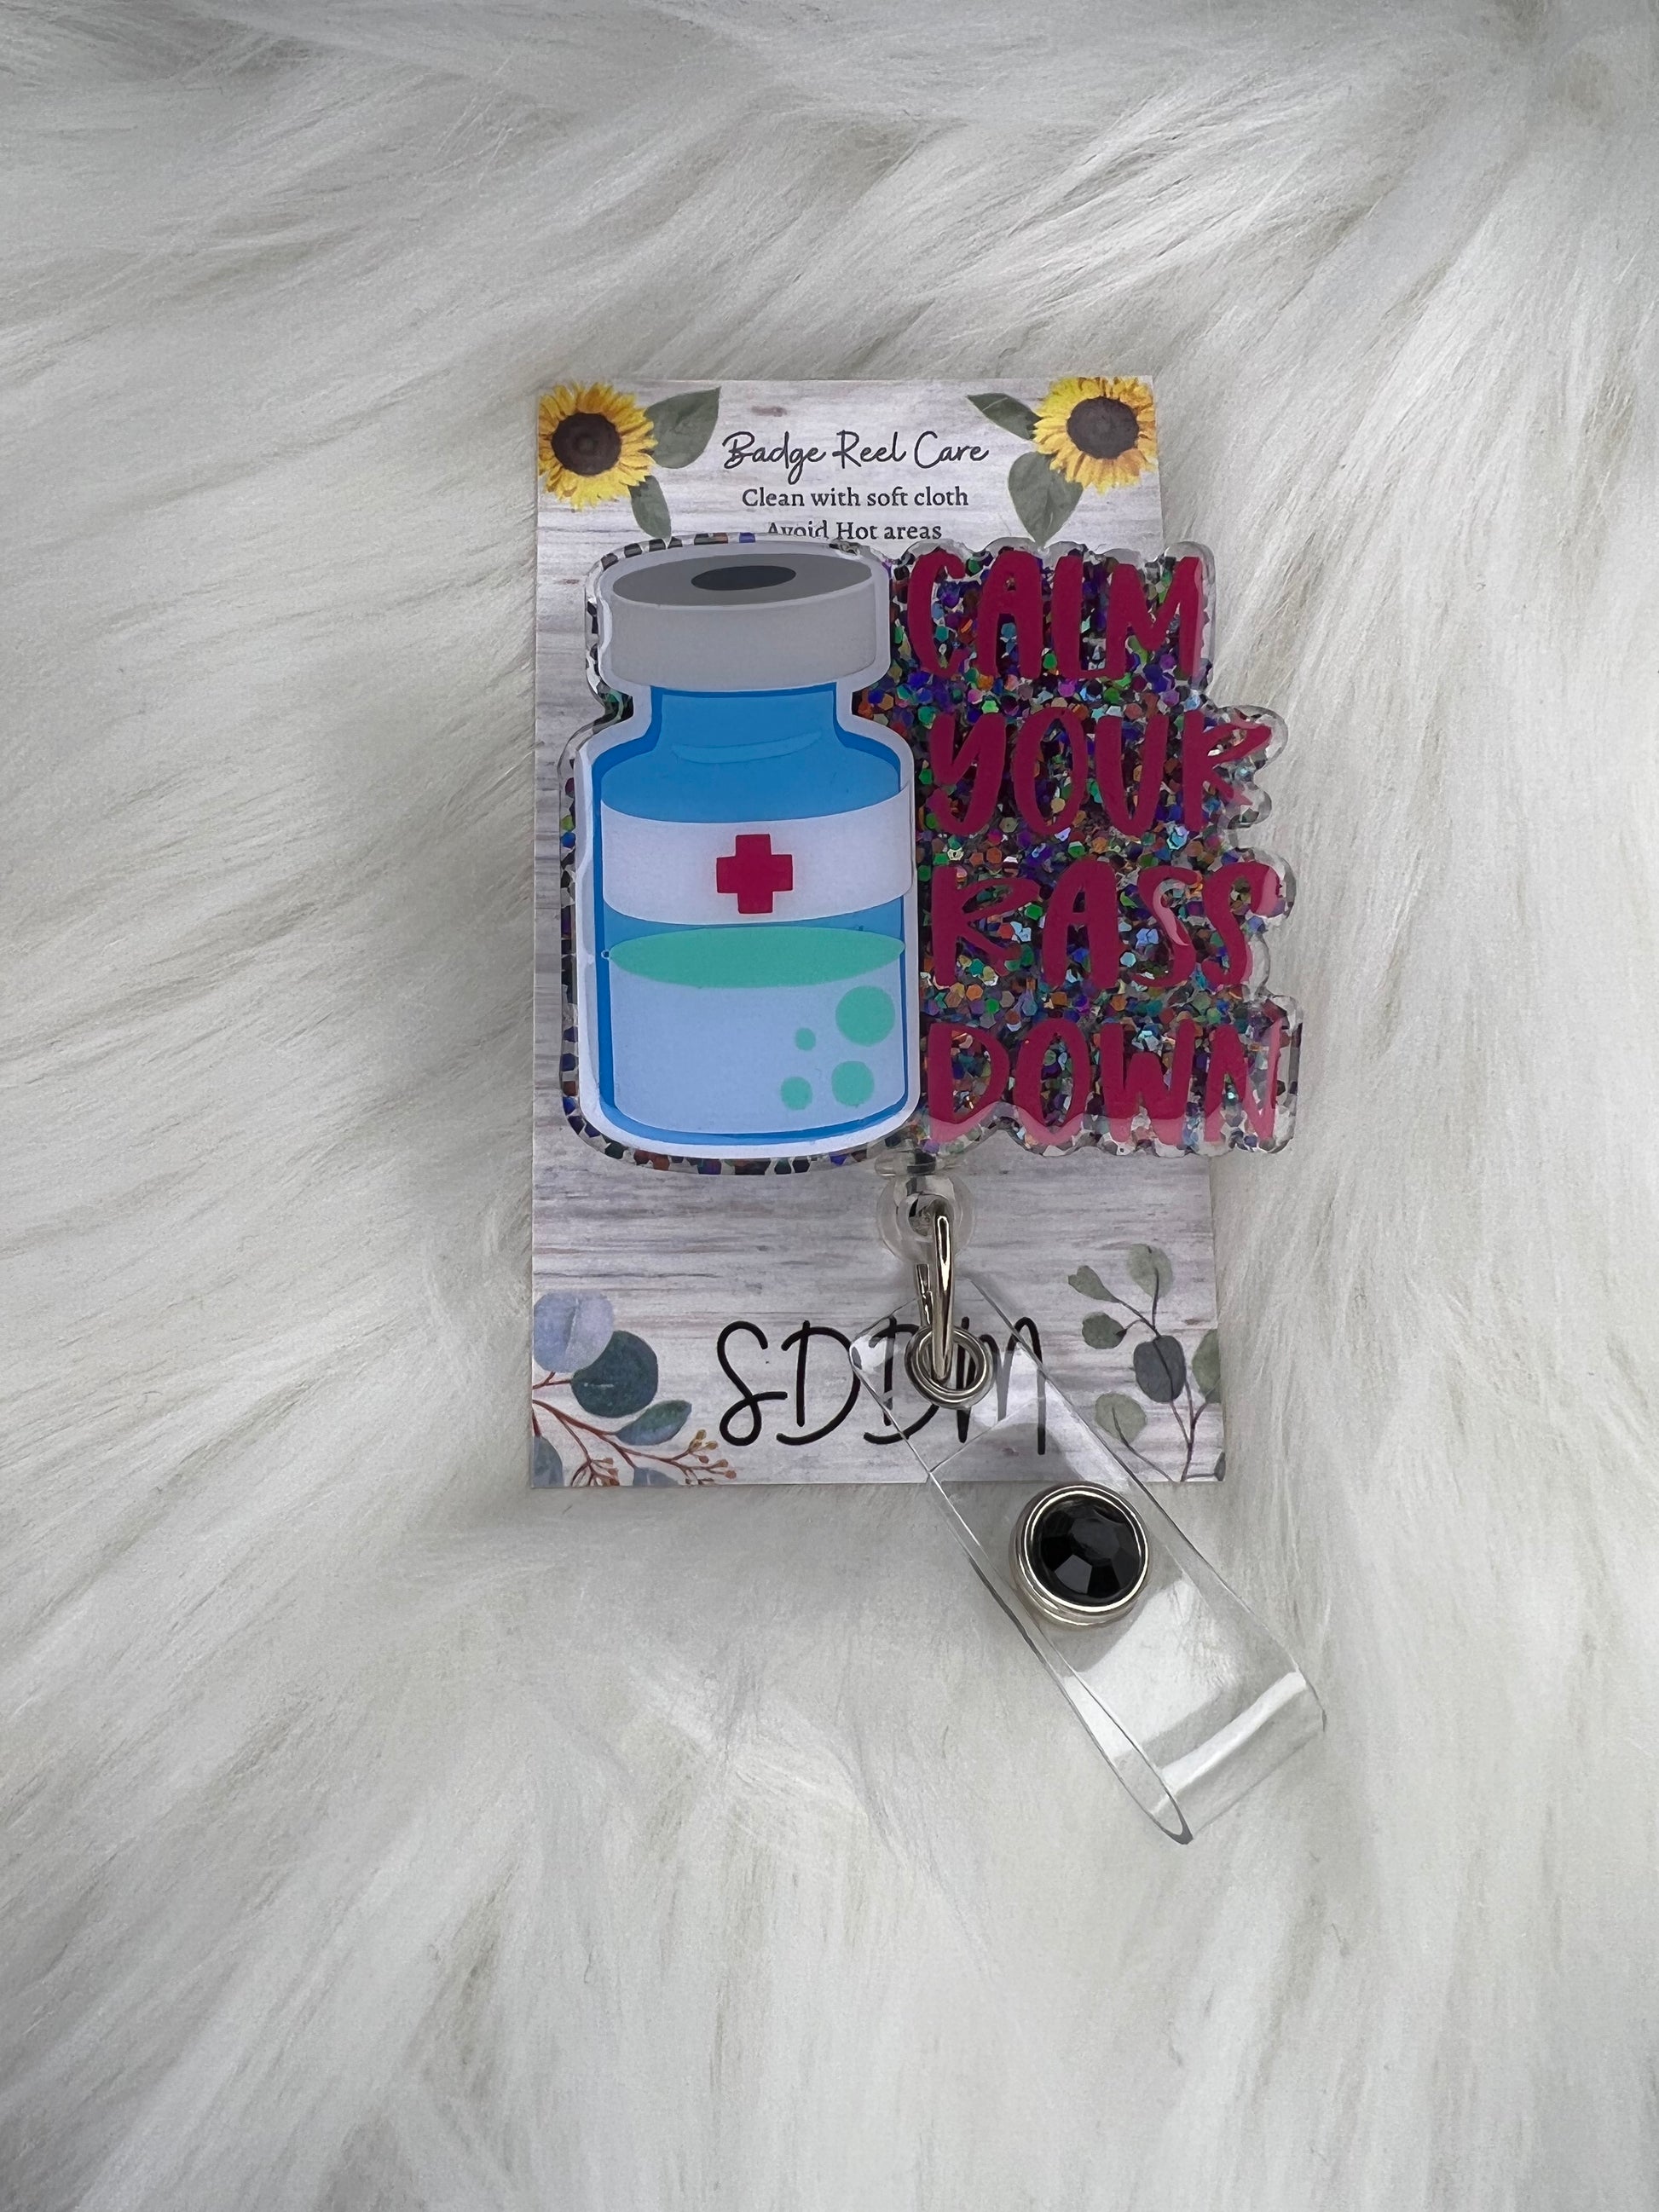 Calm your rass down funny badge reel for nurses